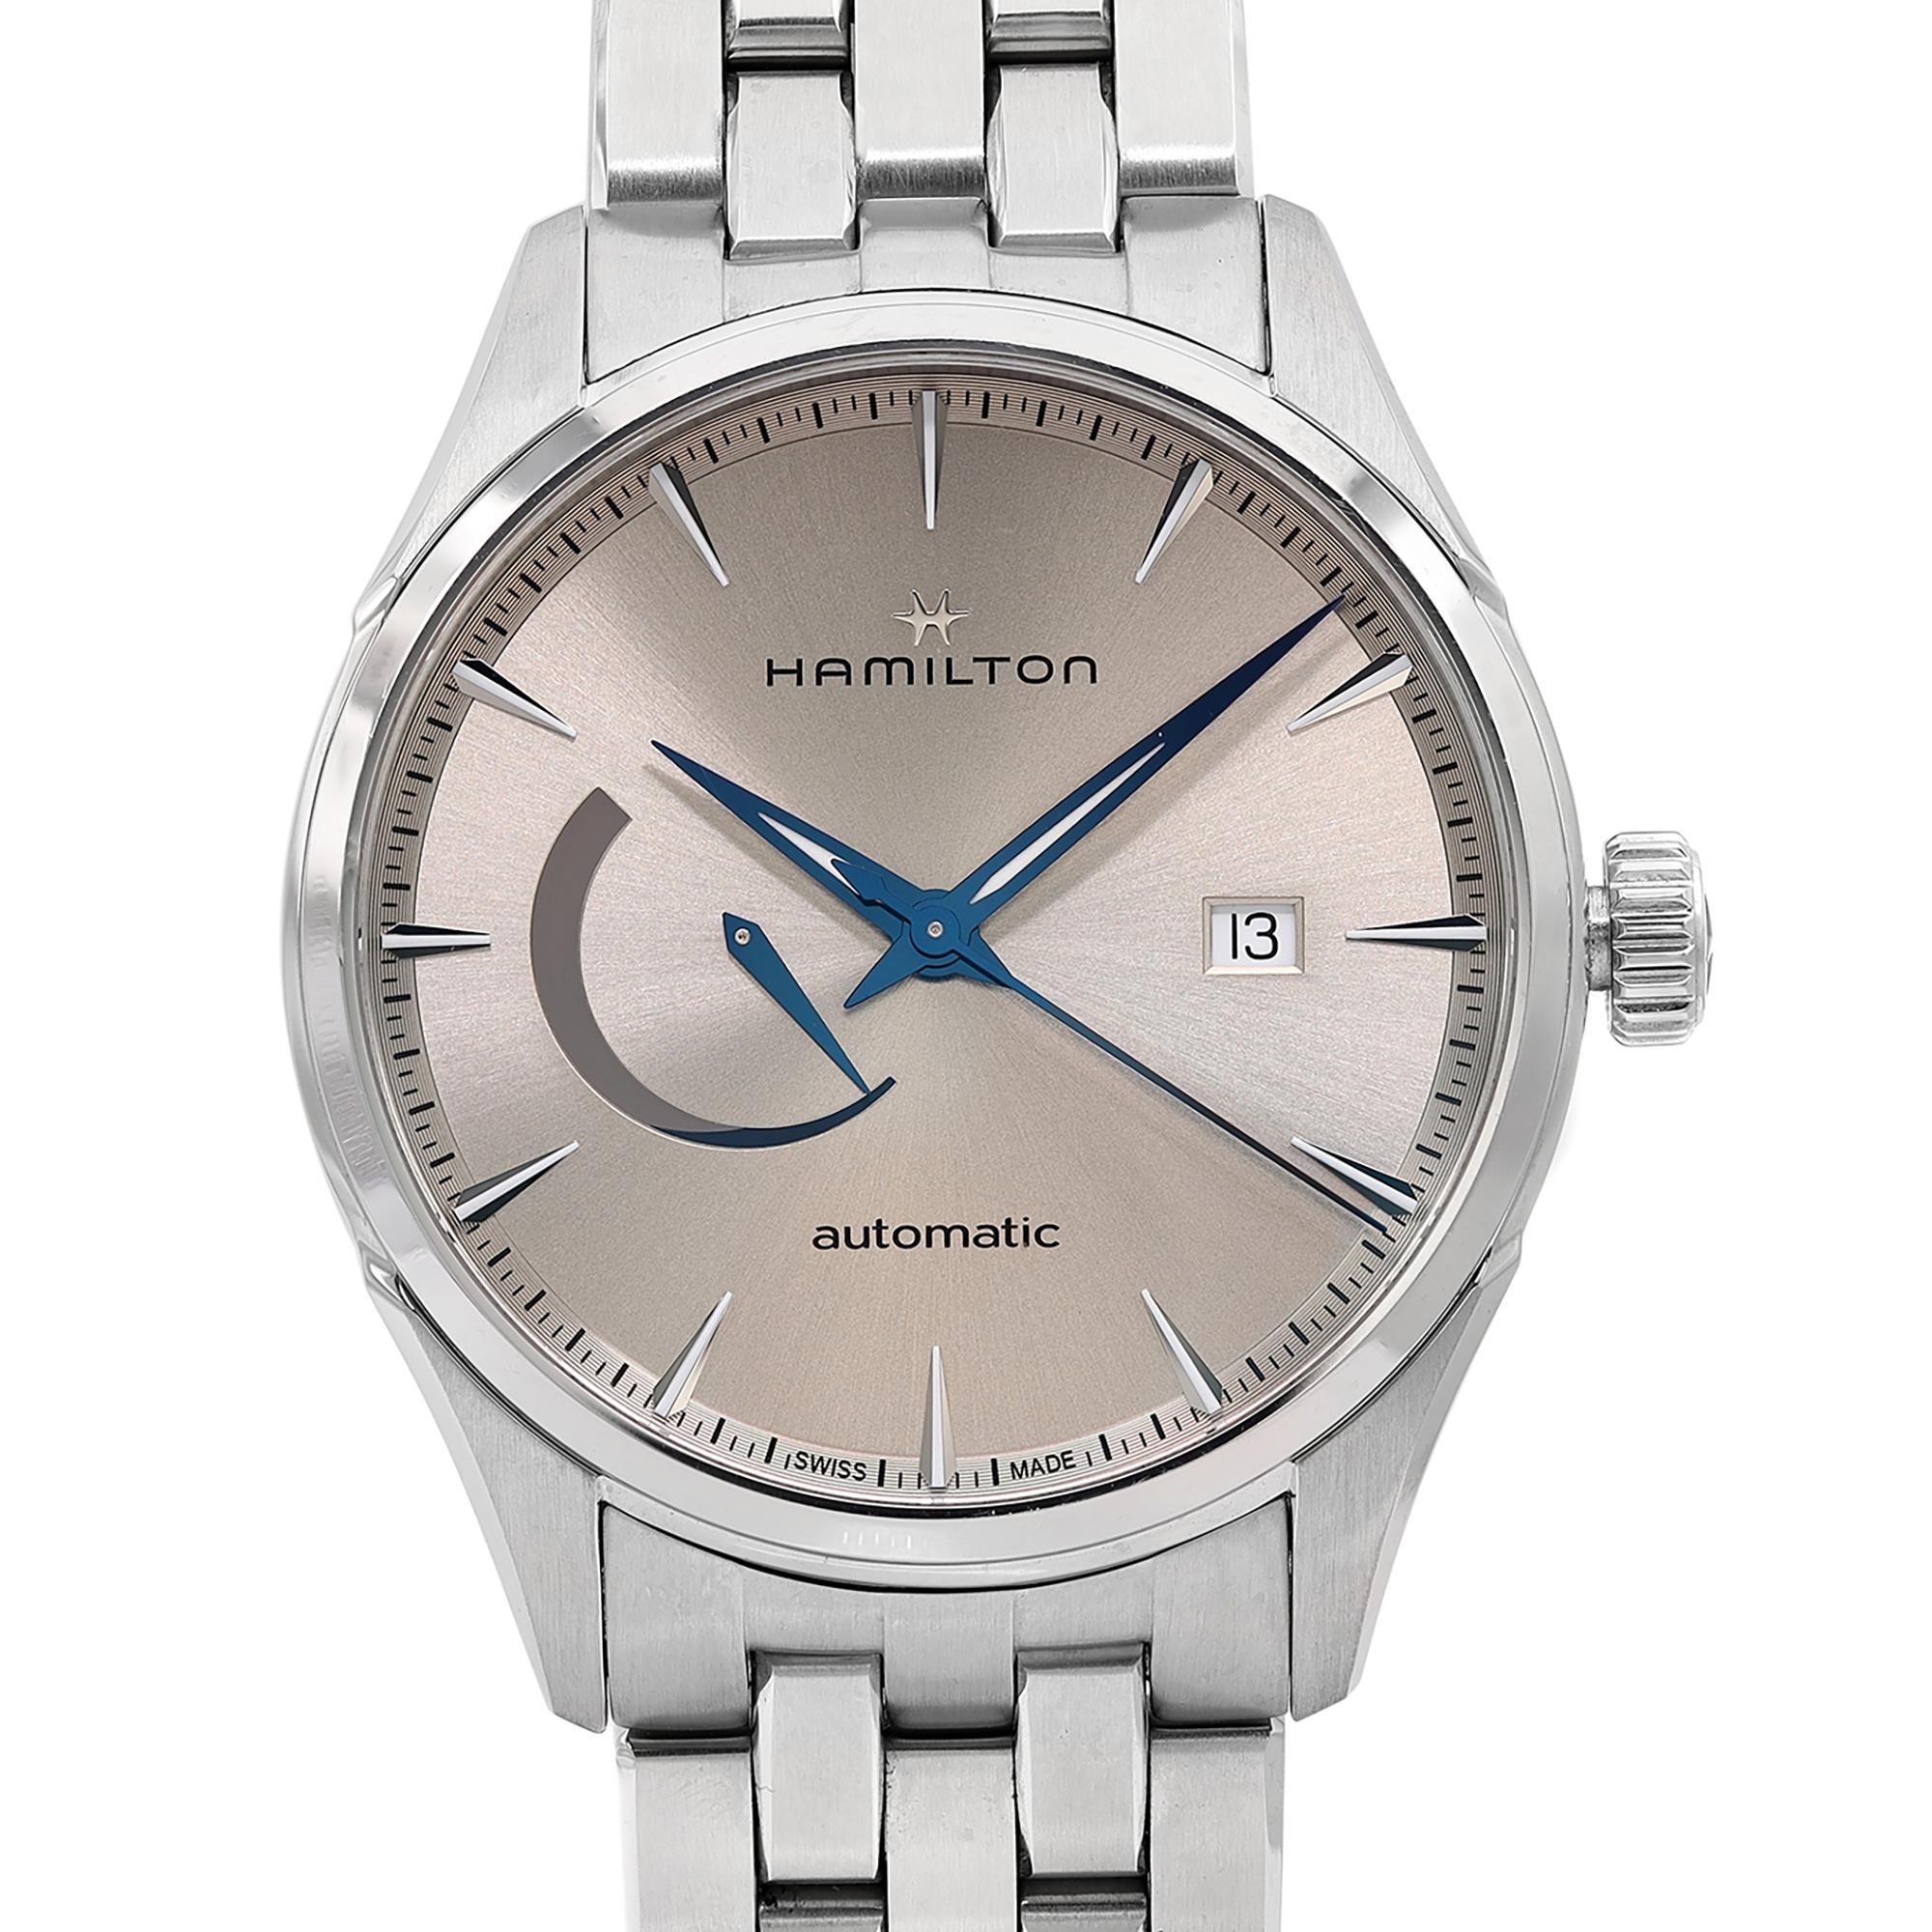 Pre-owned. Great Condition. No Original Box and Papers are Included. Comes with a Presentation Box and an Authenticity Card. Covered by a 1-year Chronostore Warranty.

Brand: Hamilton  Type: Wristwatch  Department: Men  Model Number: H32635122 